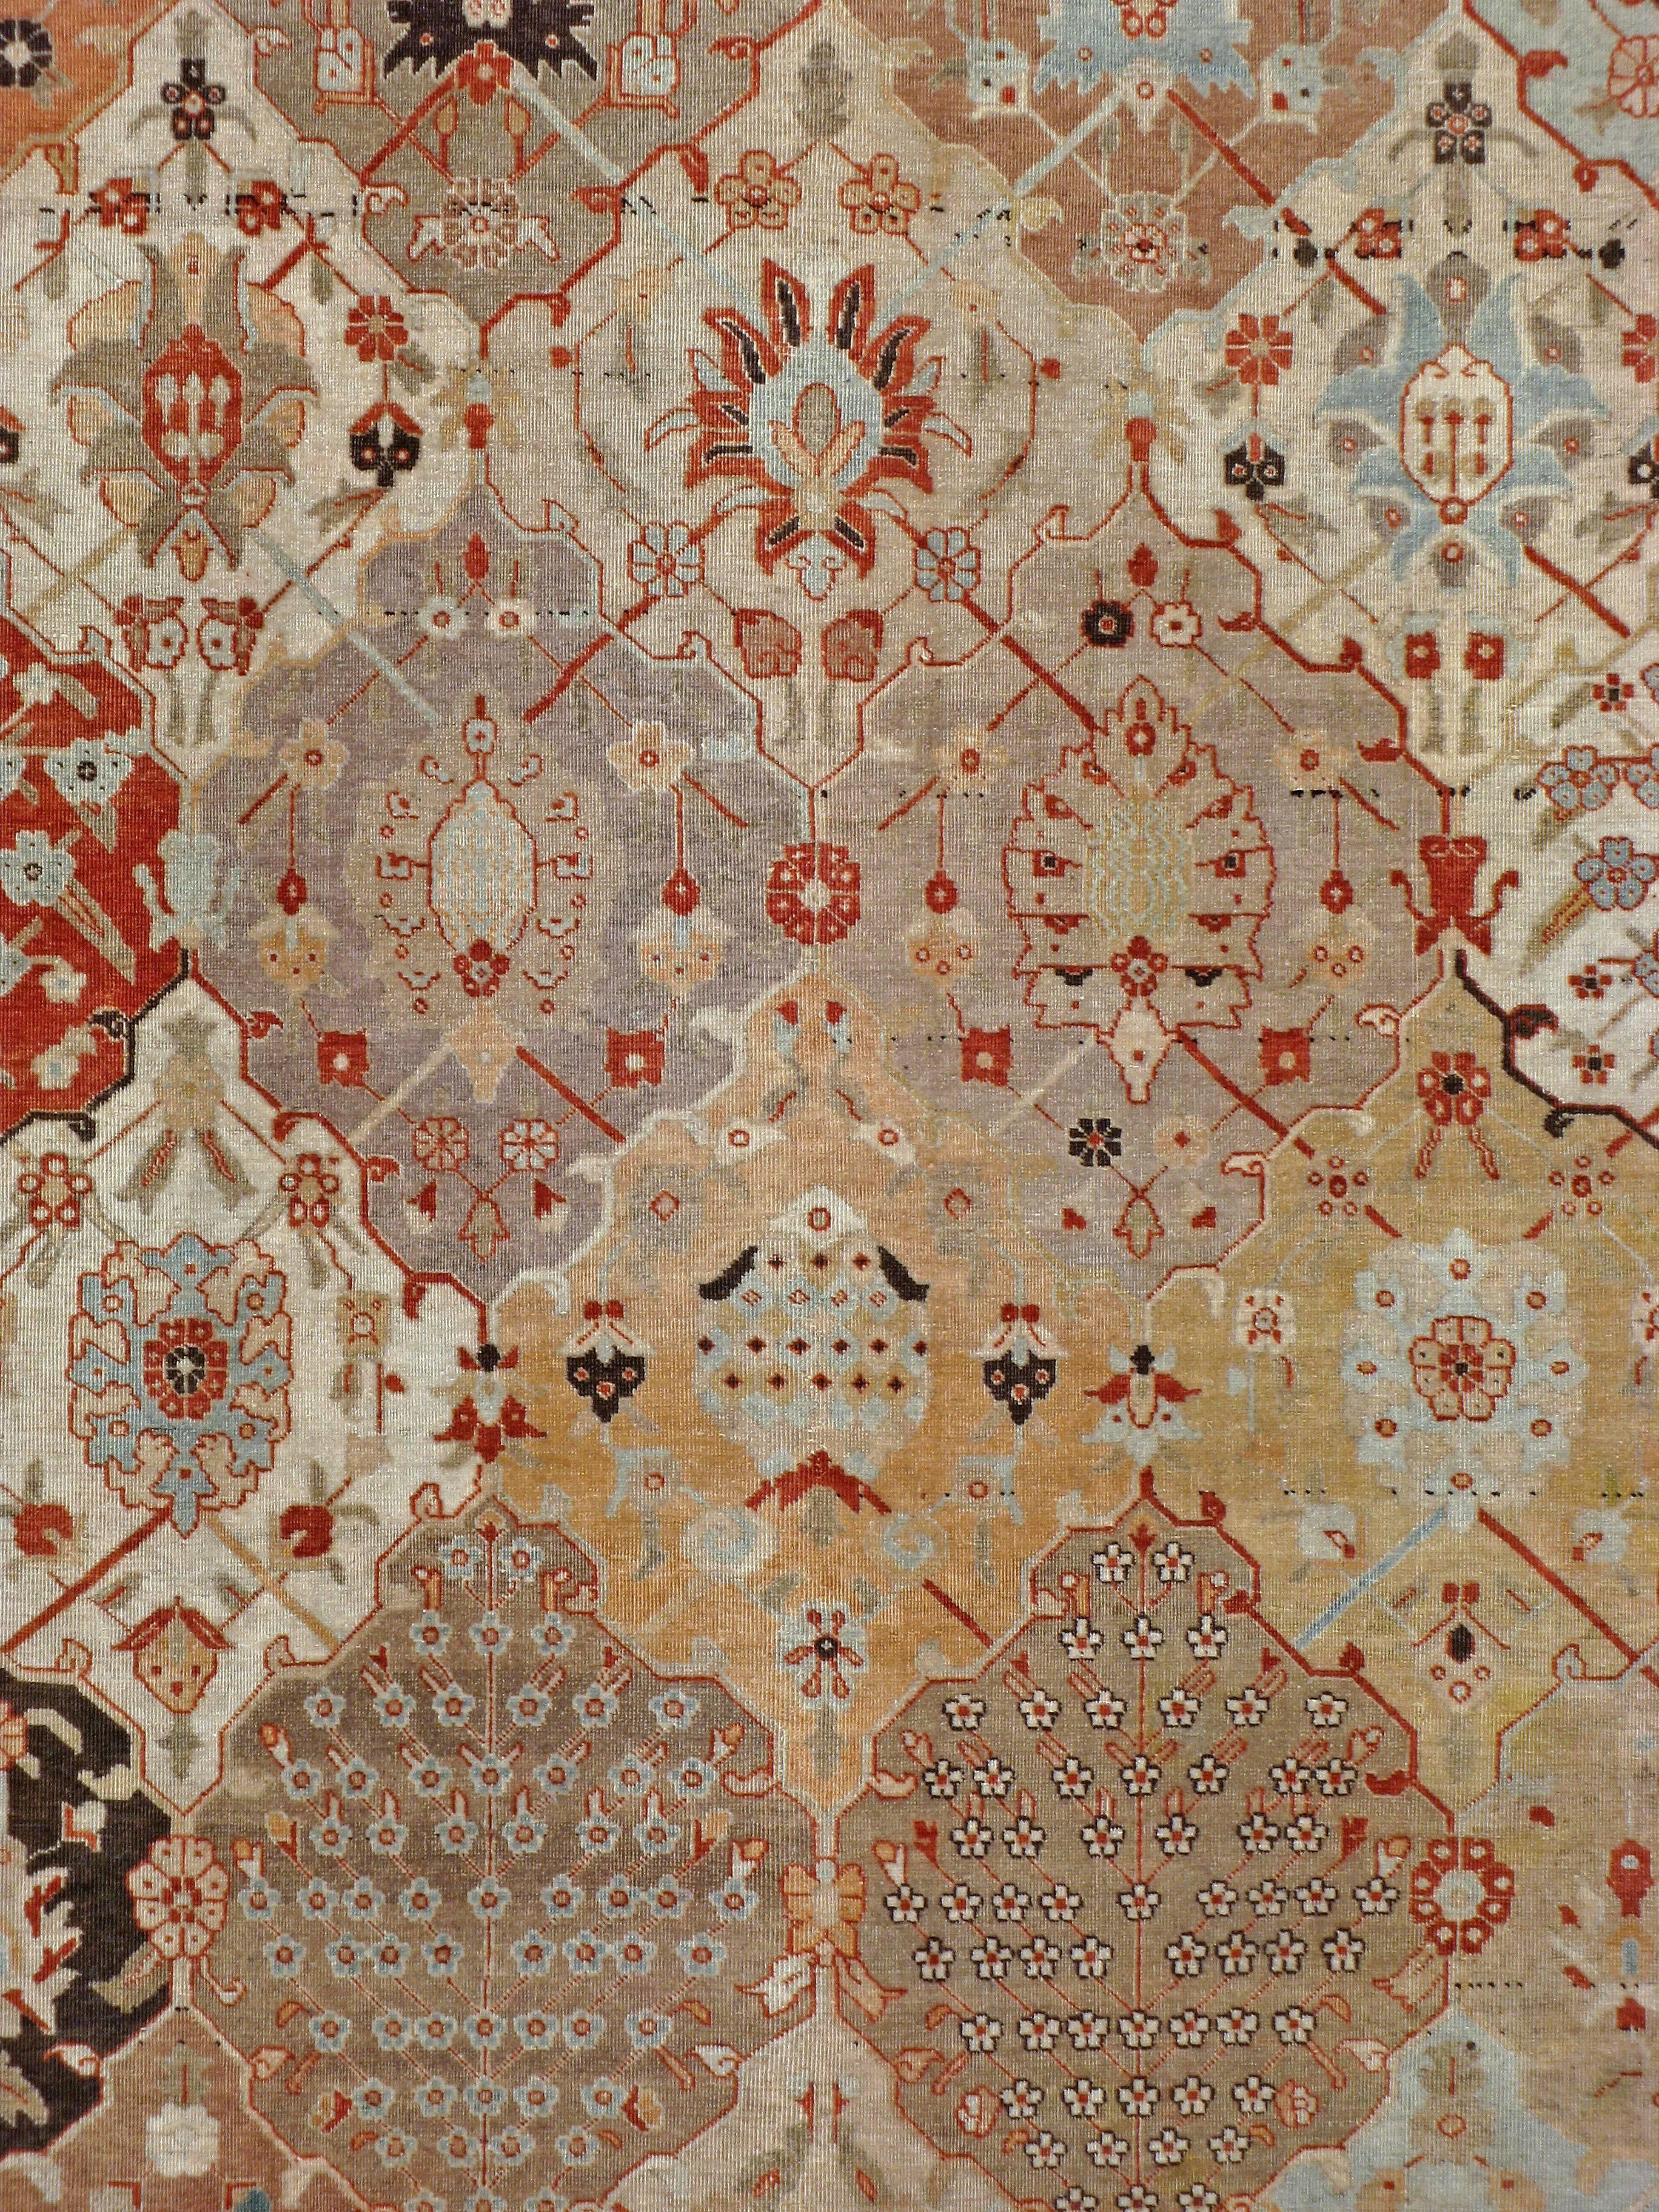 An early 20th century Persian Tabriz. Since the 17th century, Iran started exporting artisan carpets around the world, especially to Europe. Artists used one of the three versions of vertical looms later referred to as a Tabriz Loom. Artists created